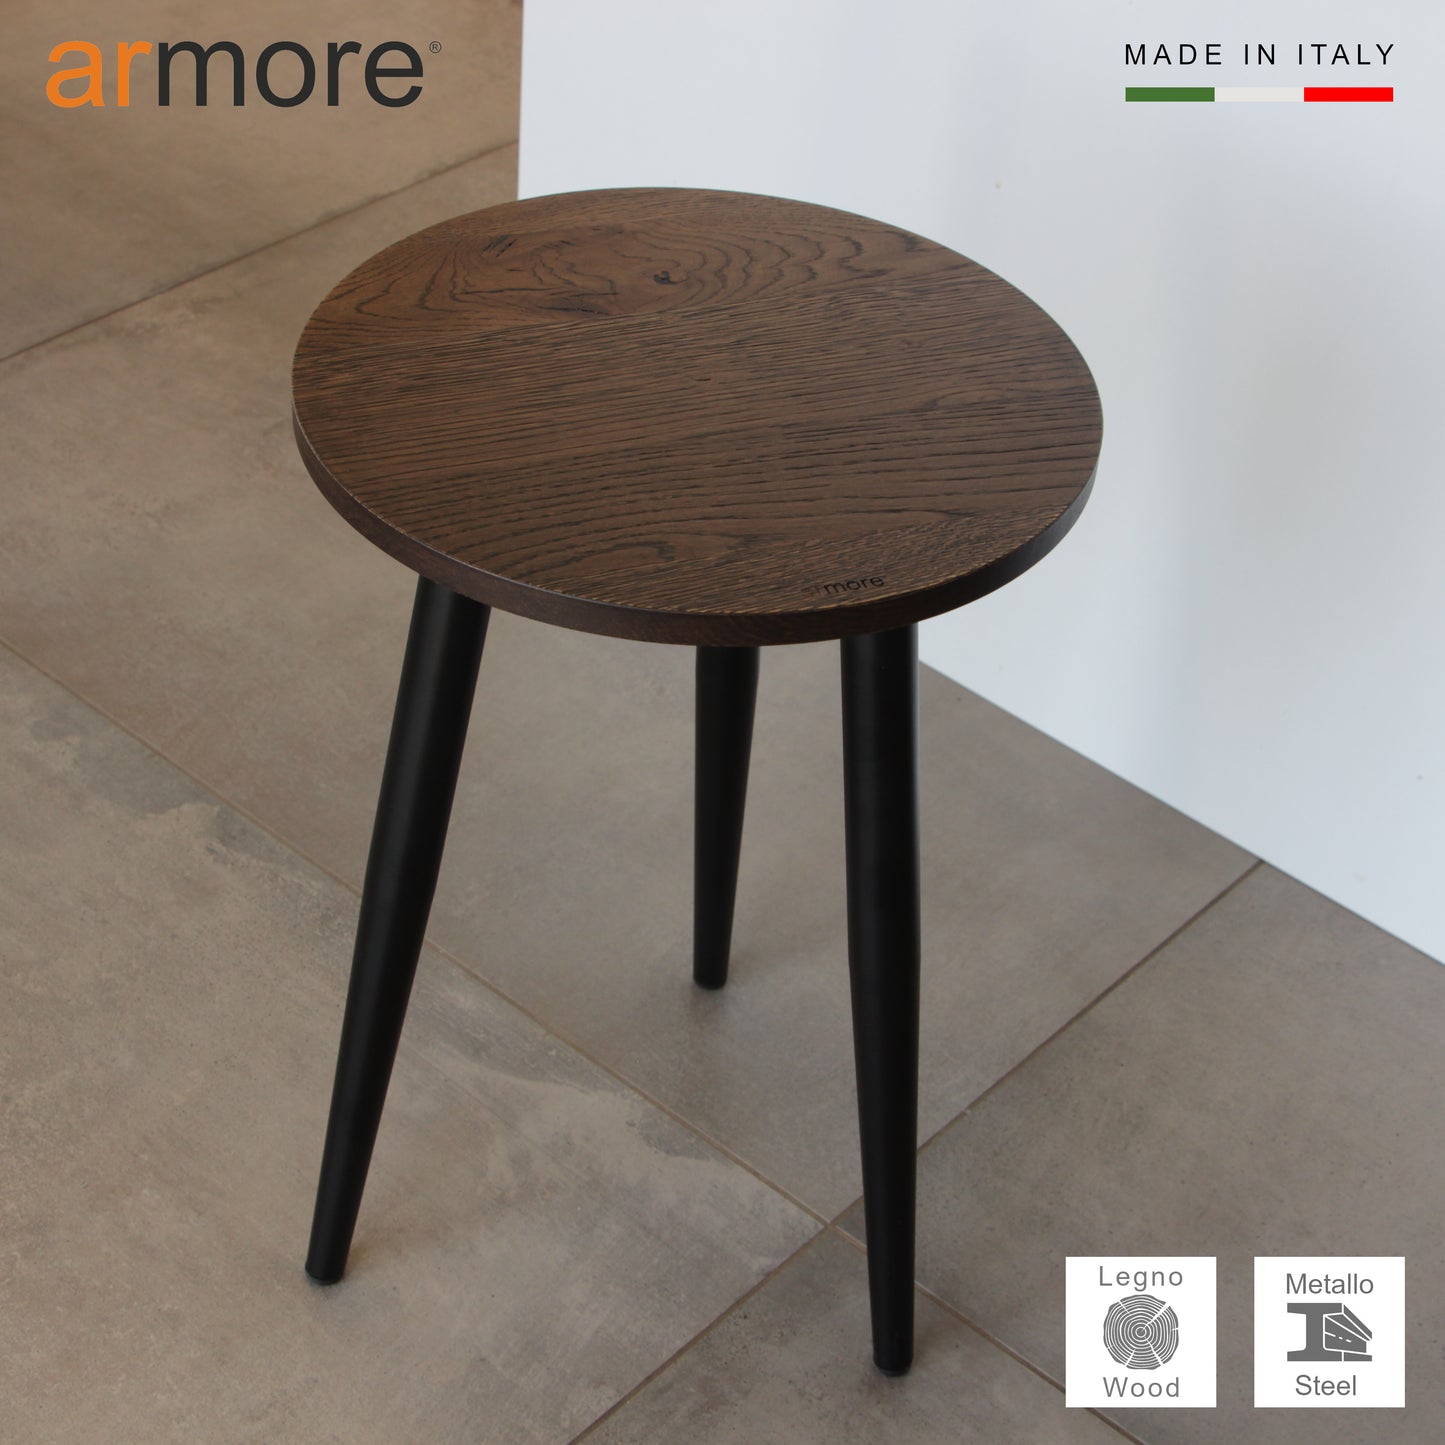 Round stool in solid wood with iron legs, modern